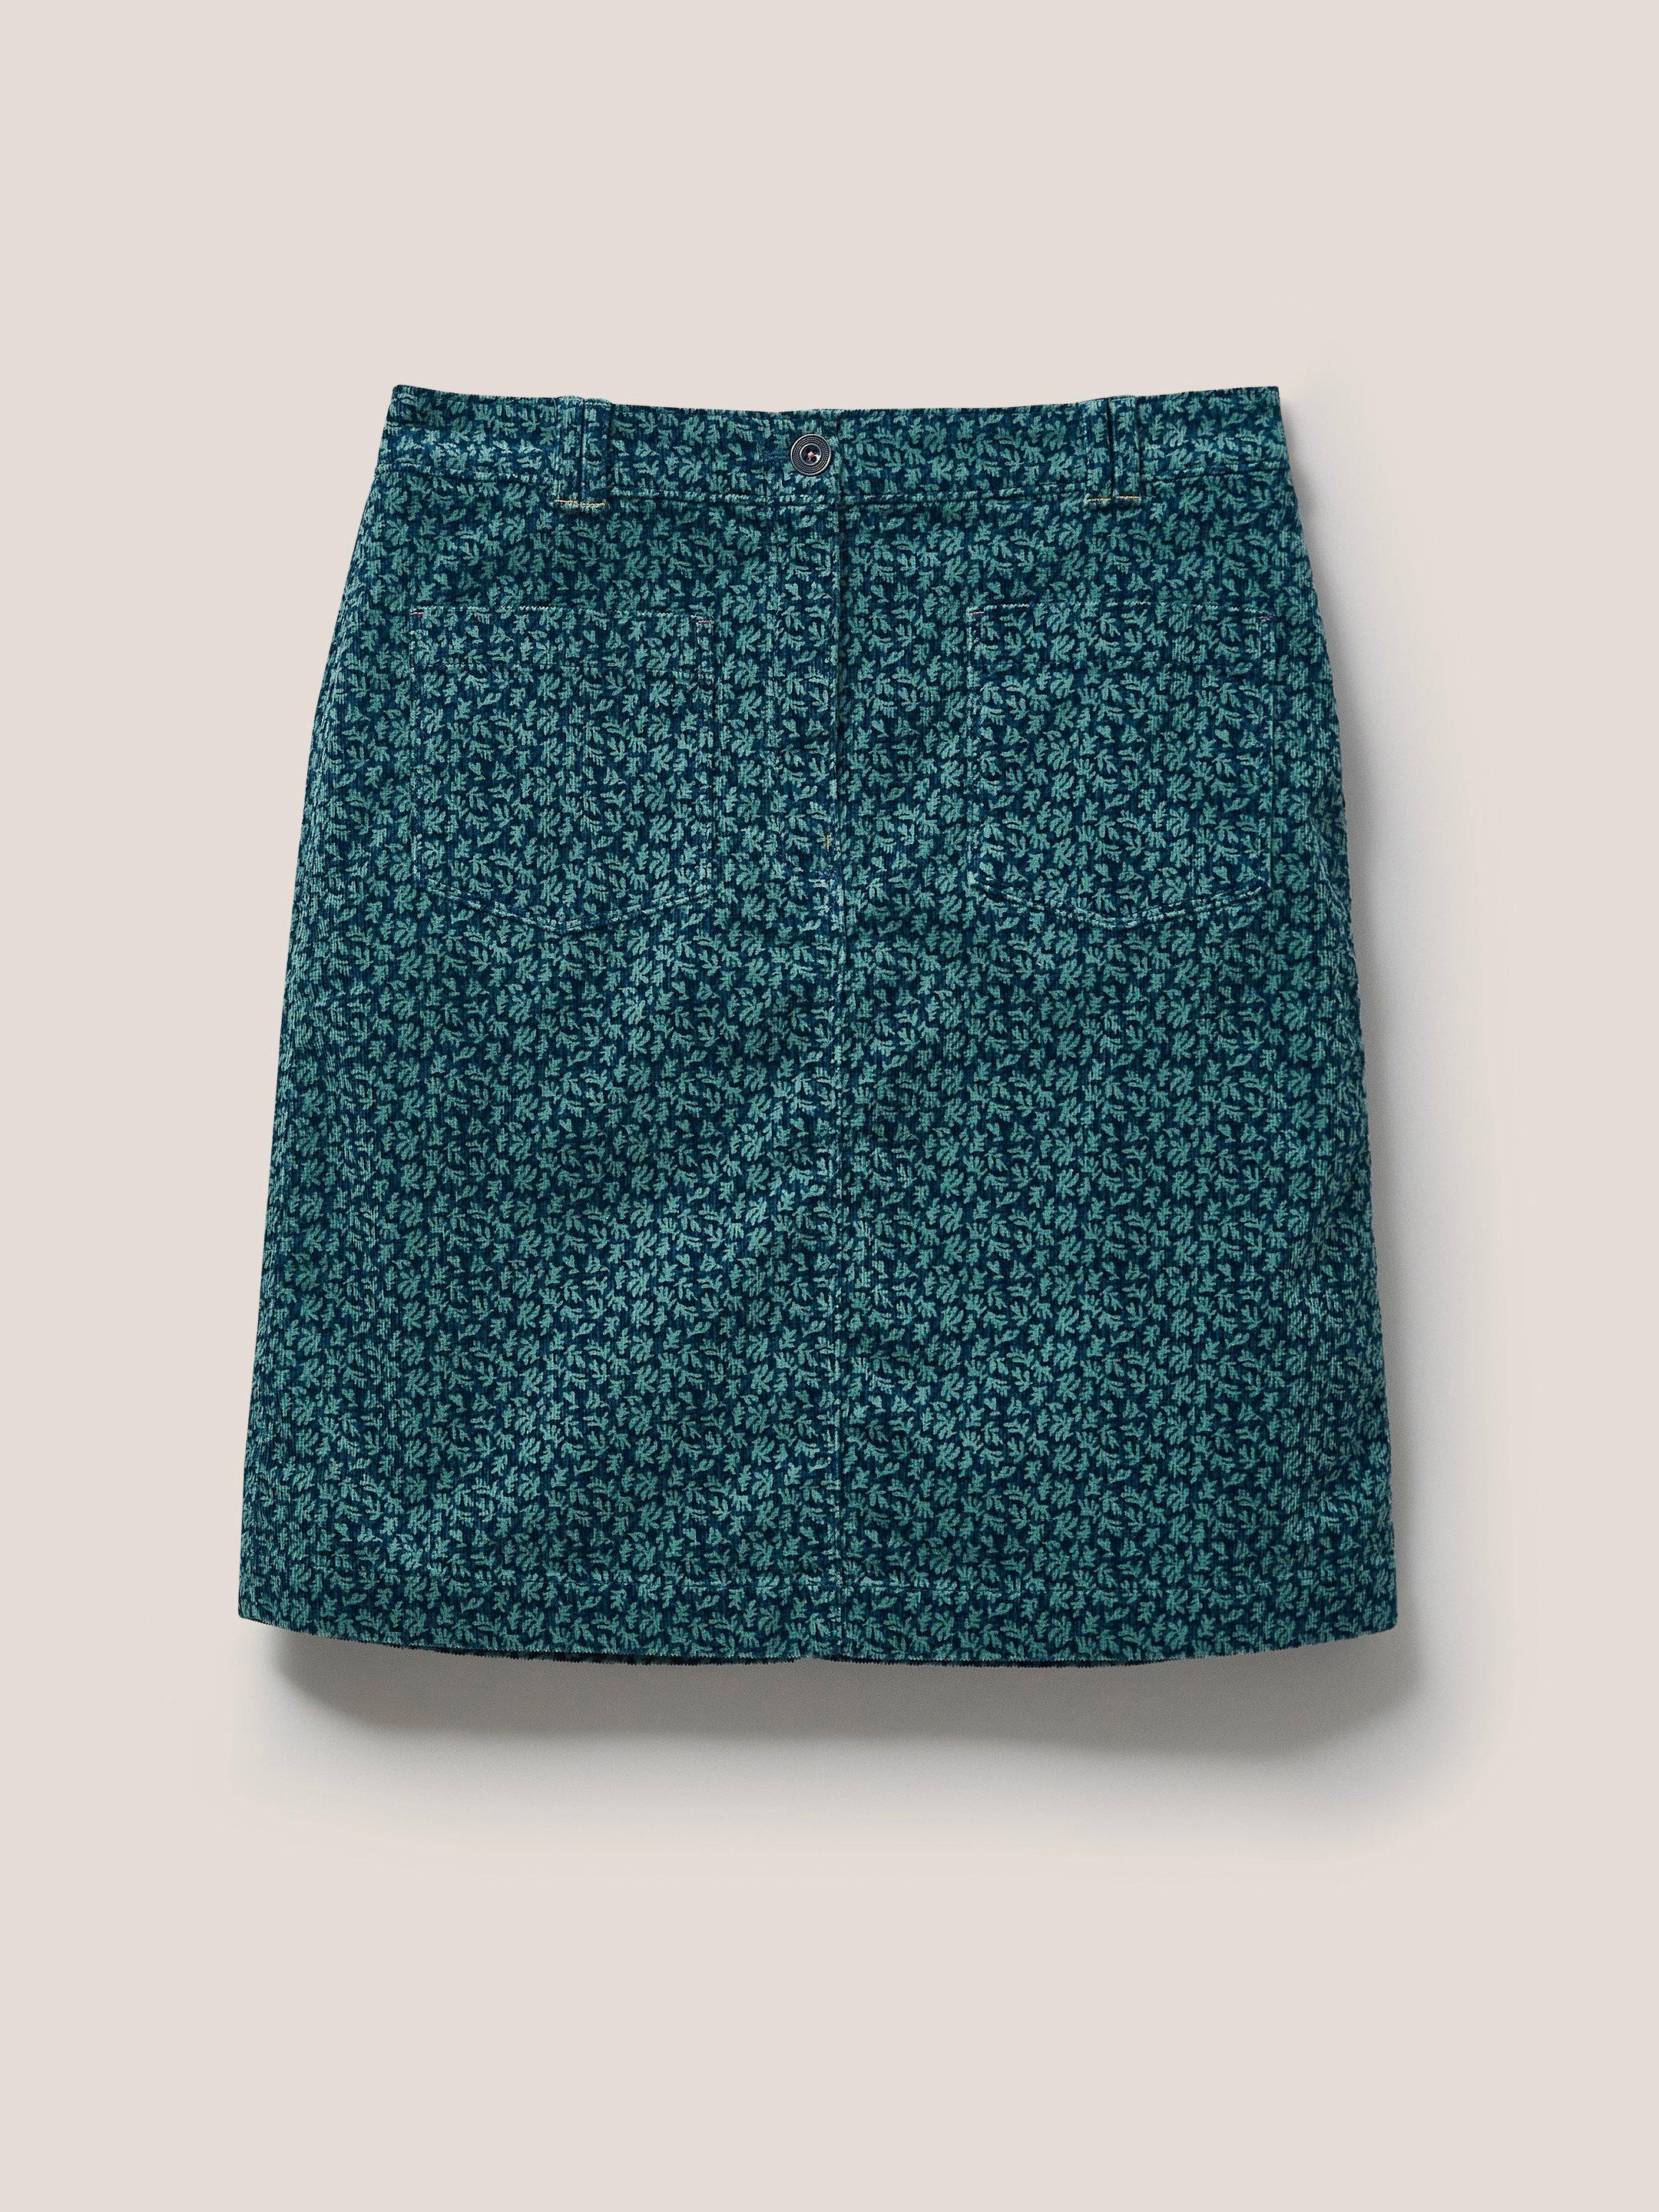 Melody Organic Cord Skirt in TEAL MLT - FLAT FRONT